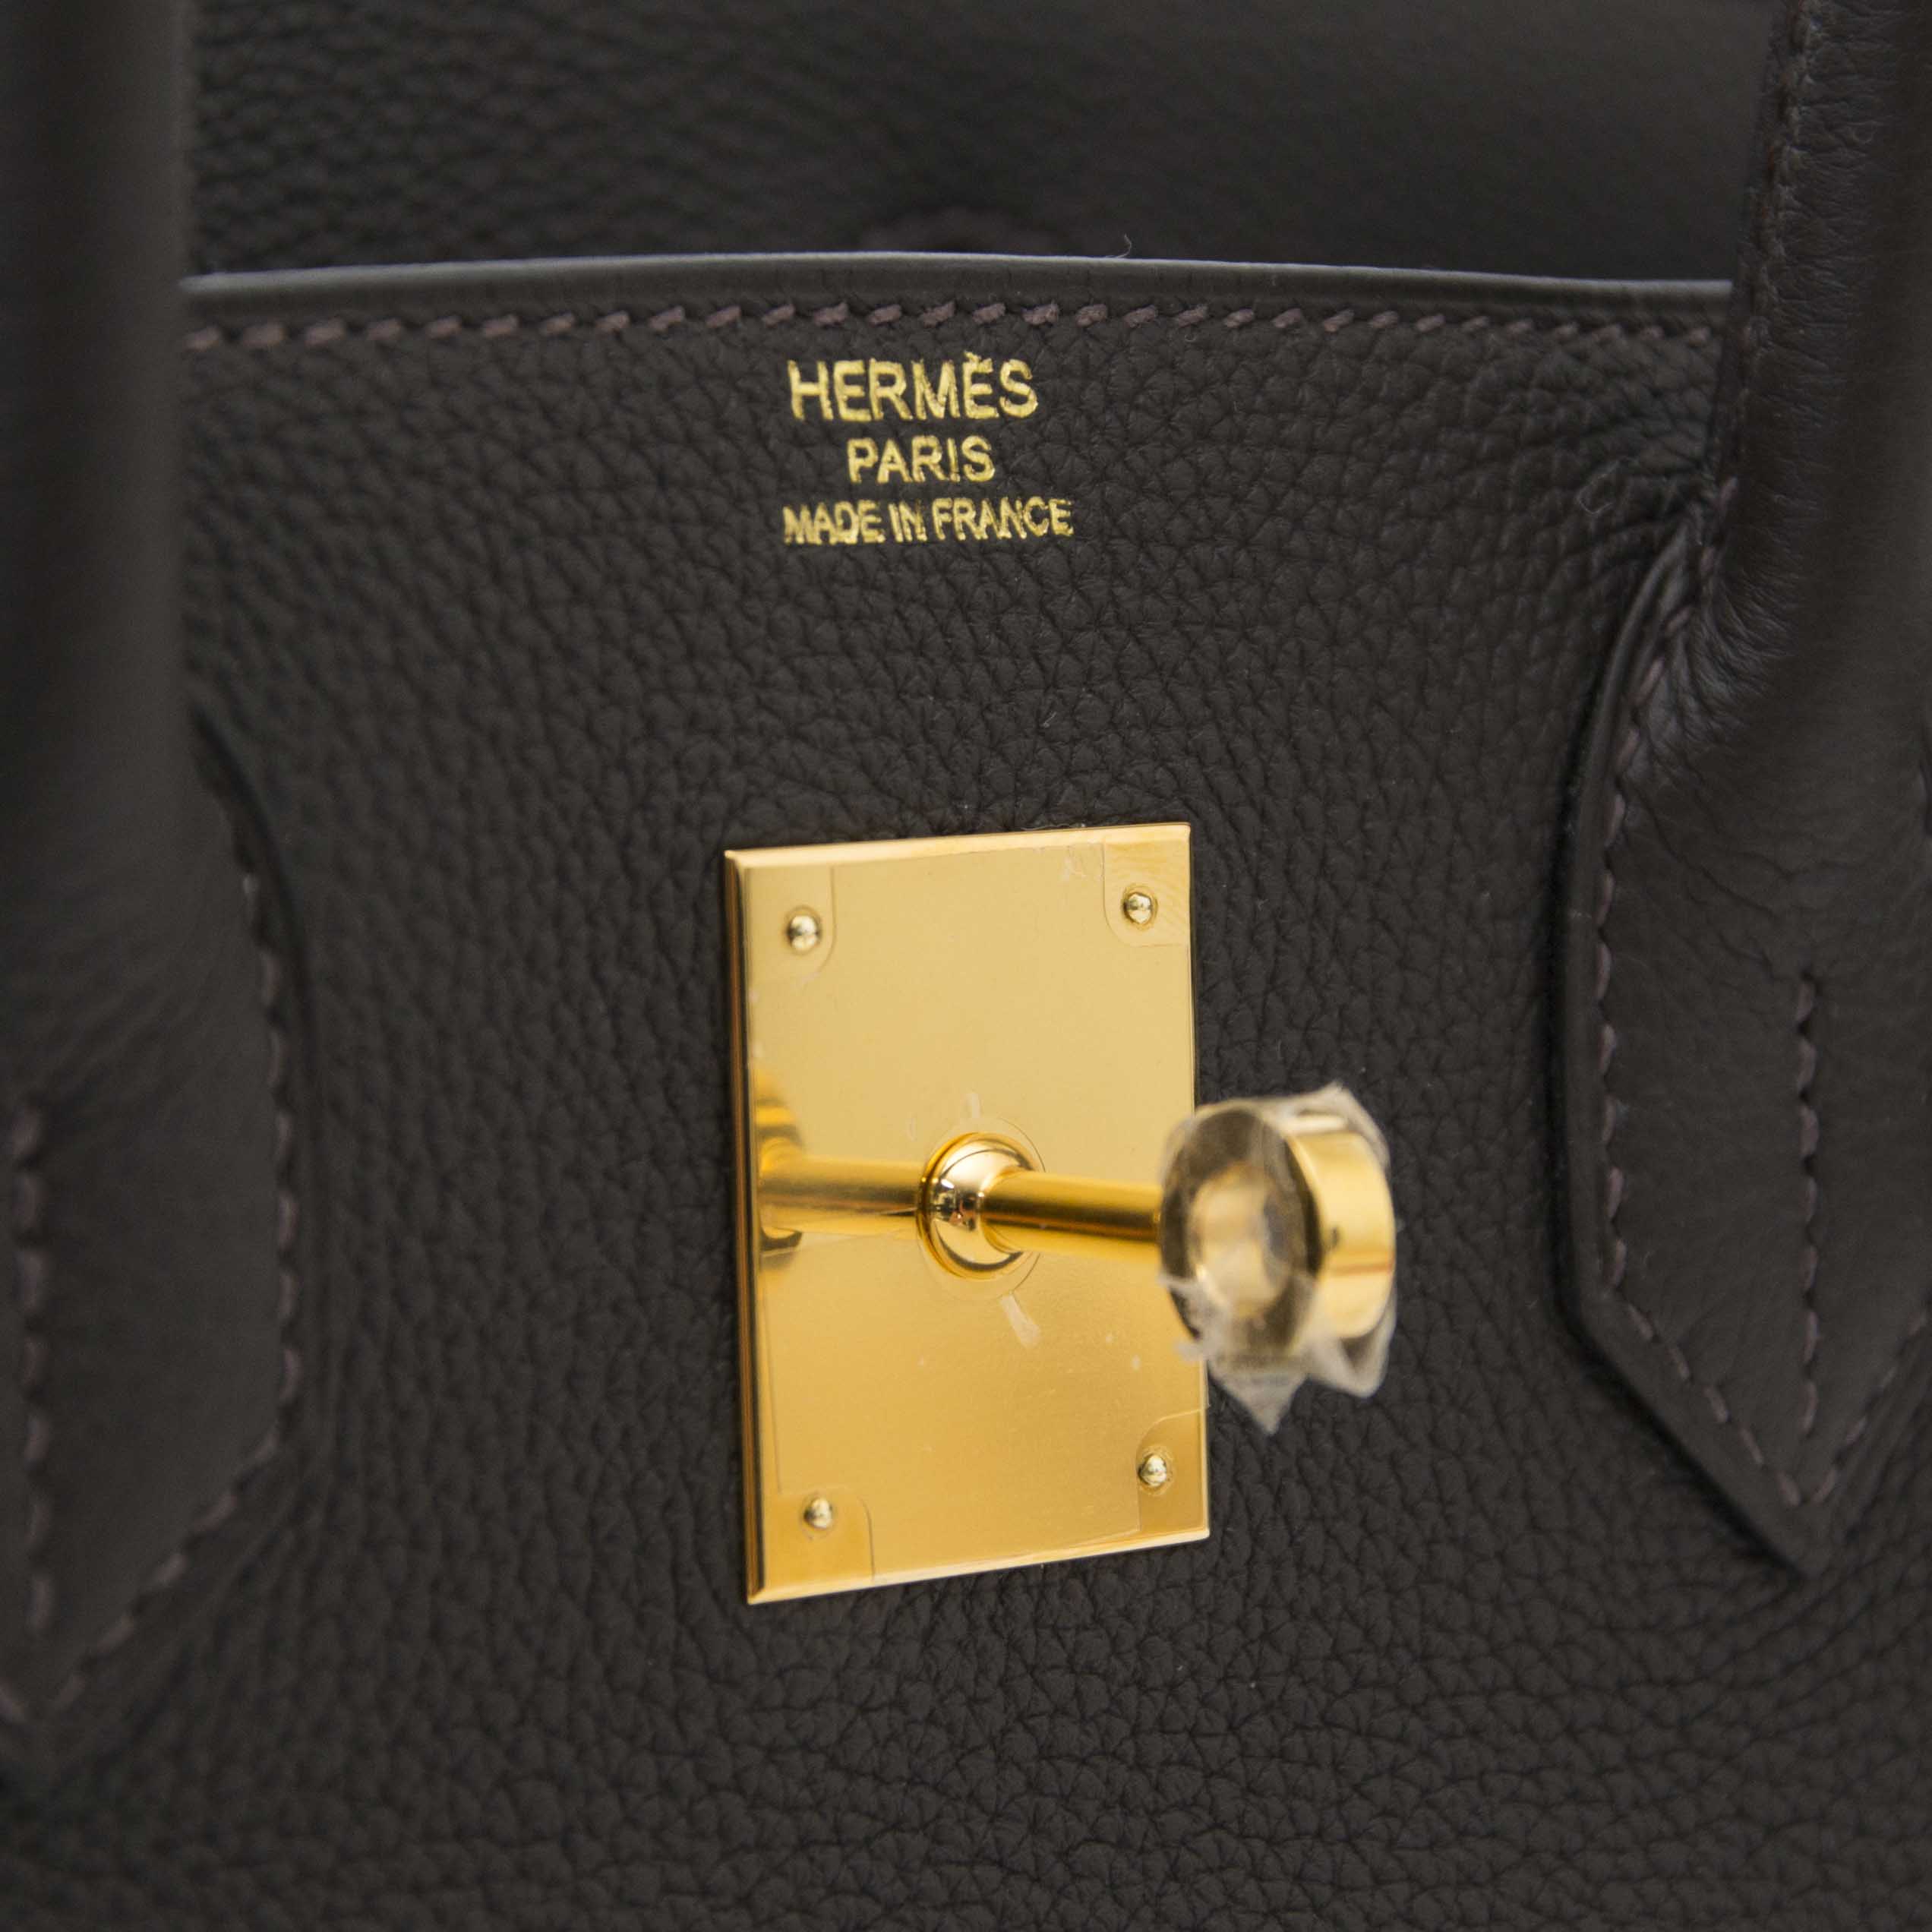 GALLERY RARE - HERMES Birkin 30 Macassar Macassar was released S/S  collection this year. Very dark brown color makes you look more elegant and  cool. In addition the bag has